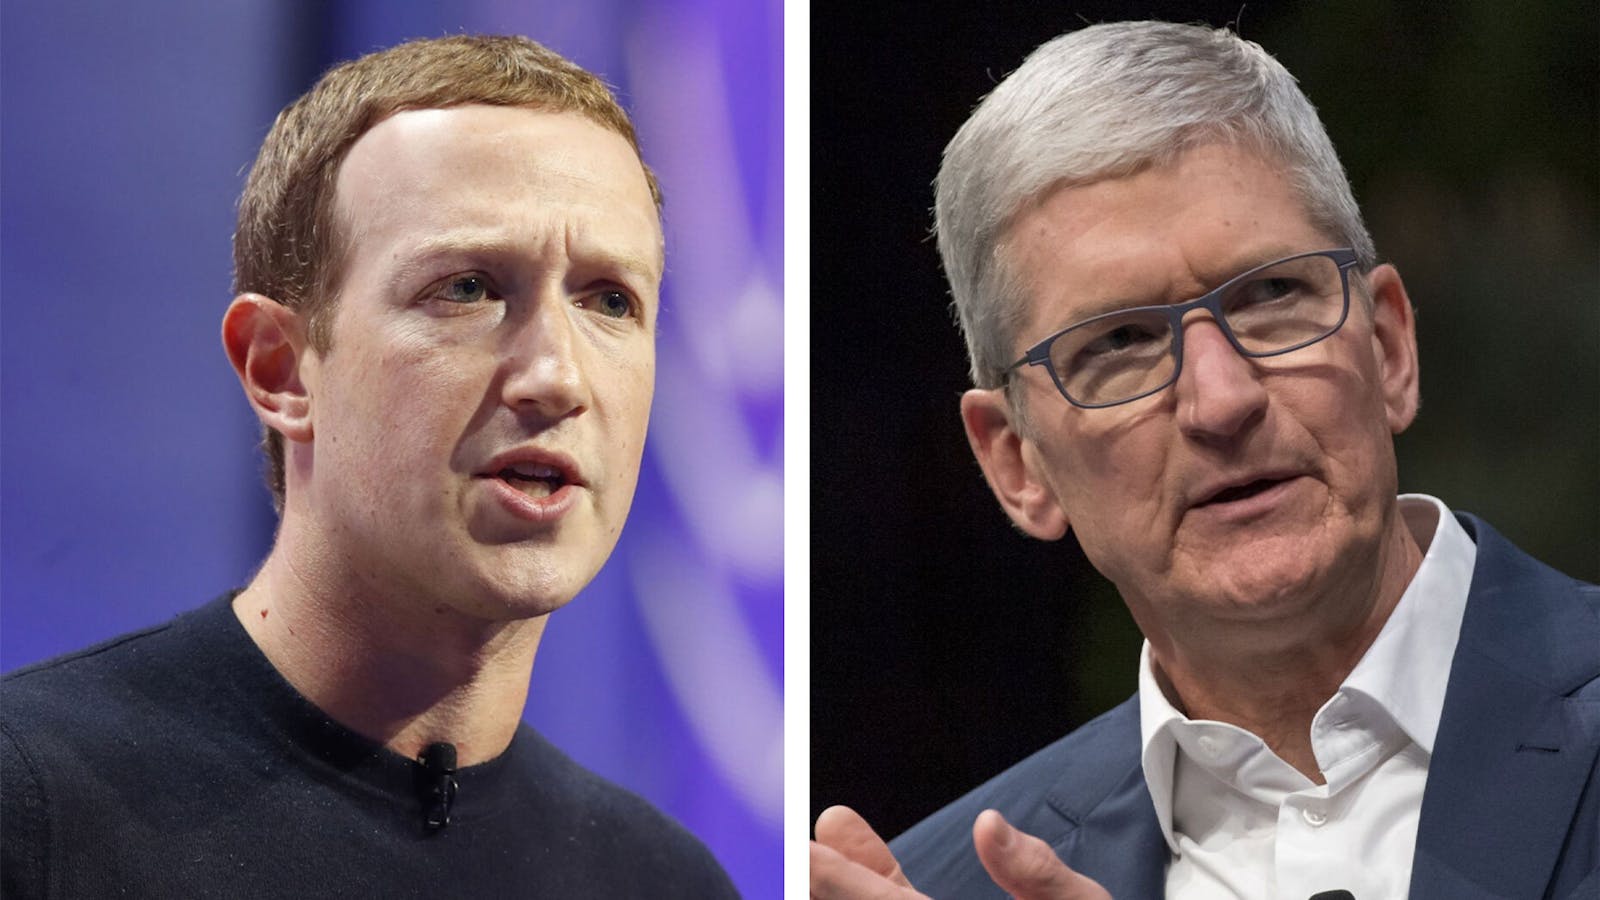 Facebook CEO Mark Zuckerberg (l) and Apple CEO Tim Cook (r). Photo: Bloomberg